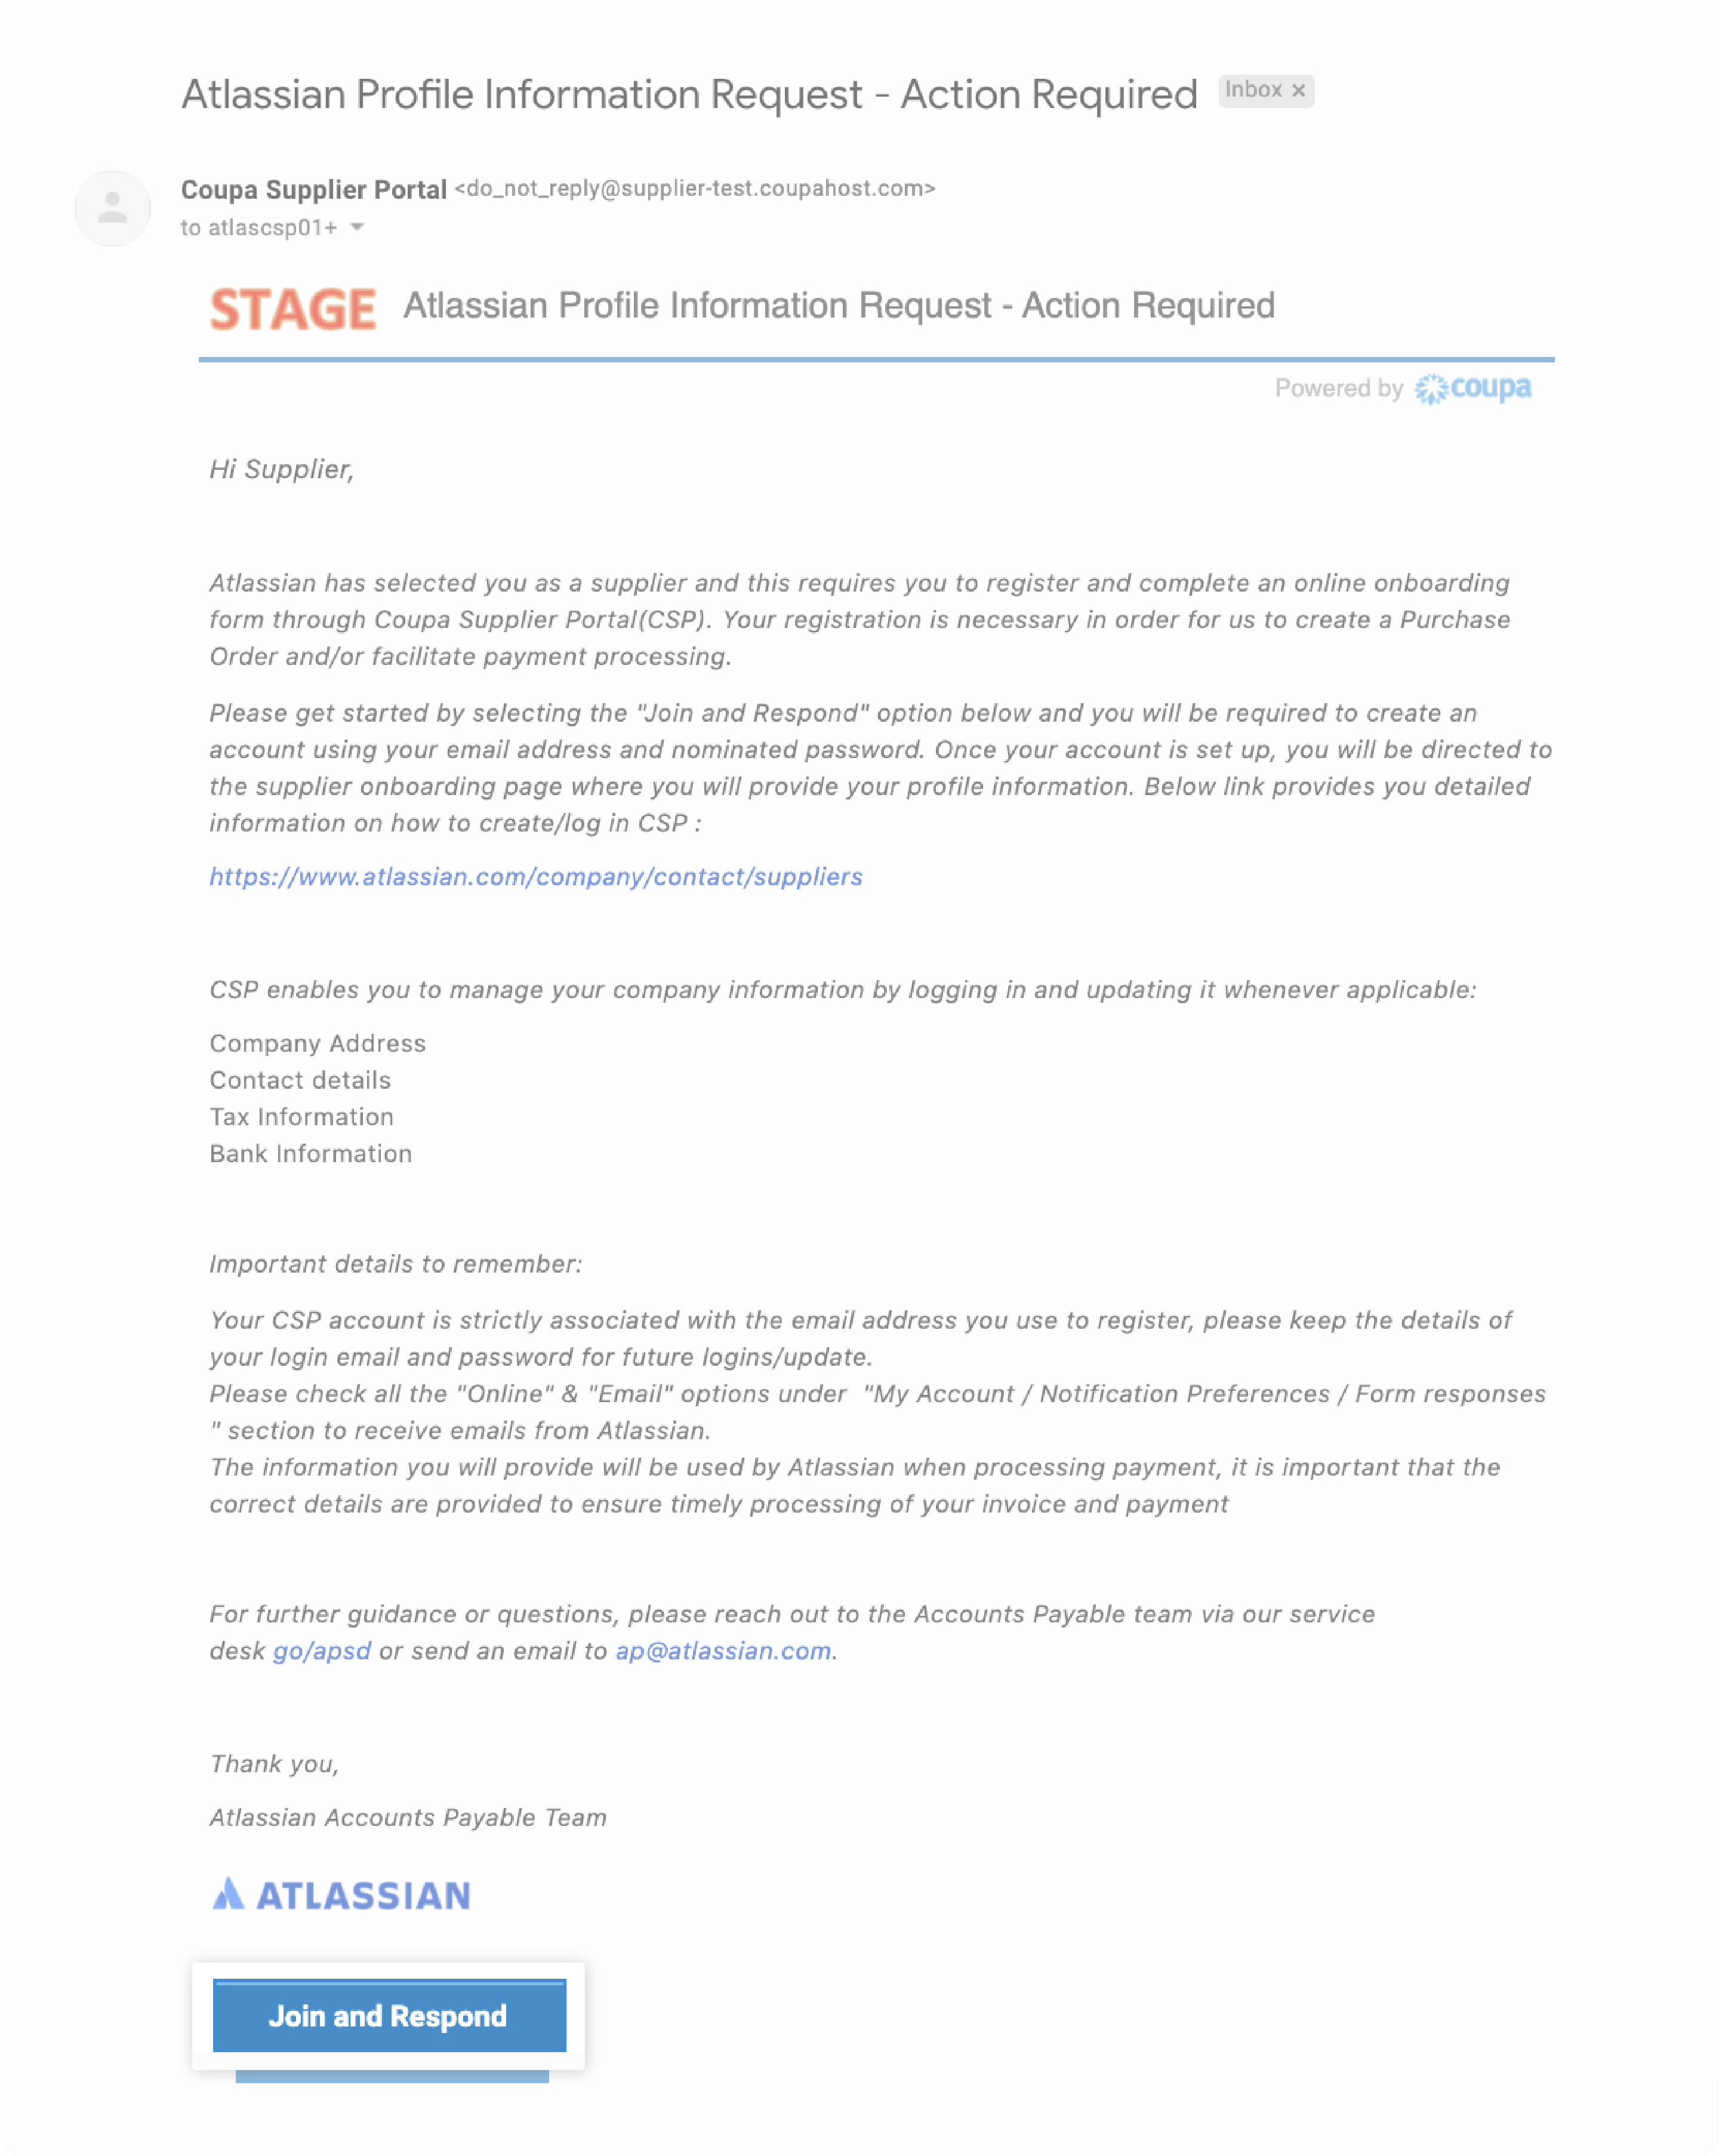 Atlassian Profile Information Request- Action required email